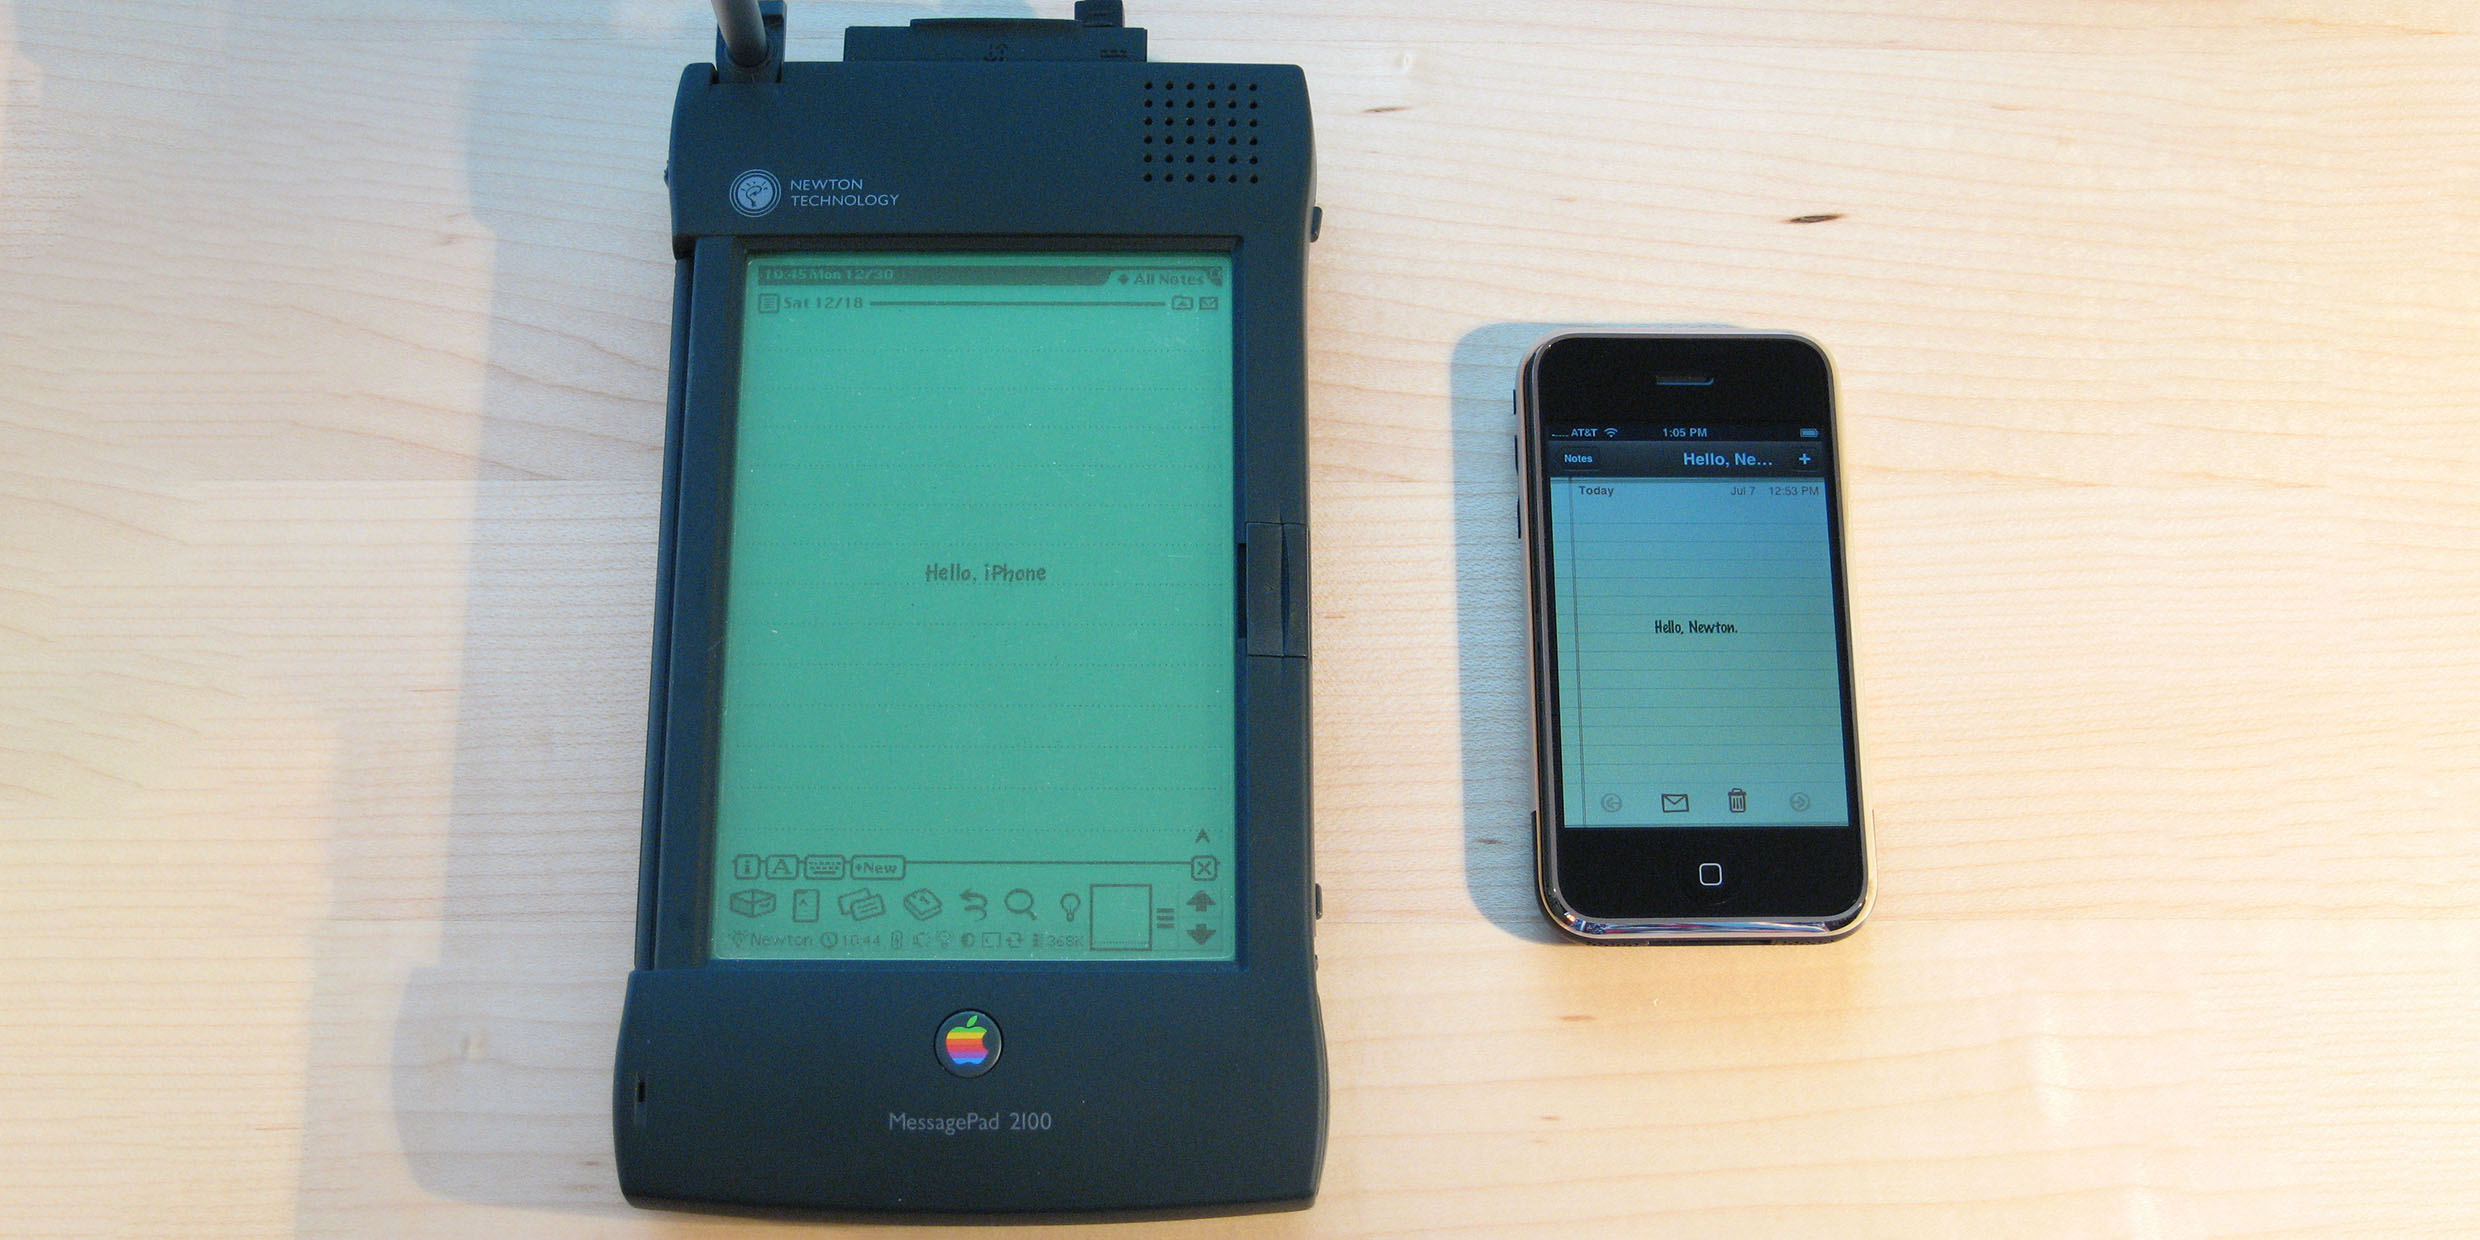 Image of a large Apple Newton next to a small Apple iPhone